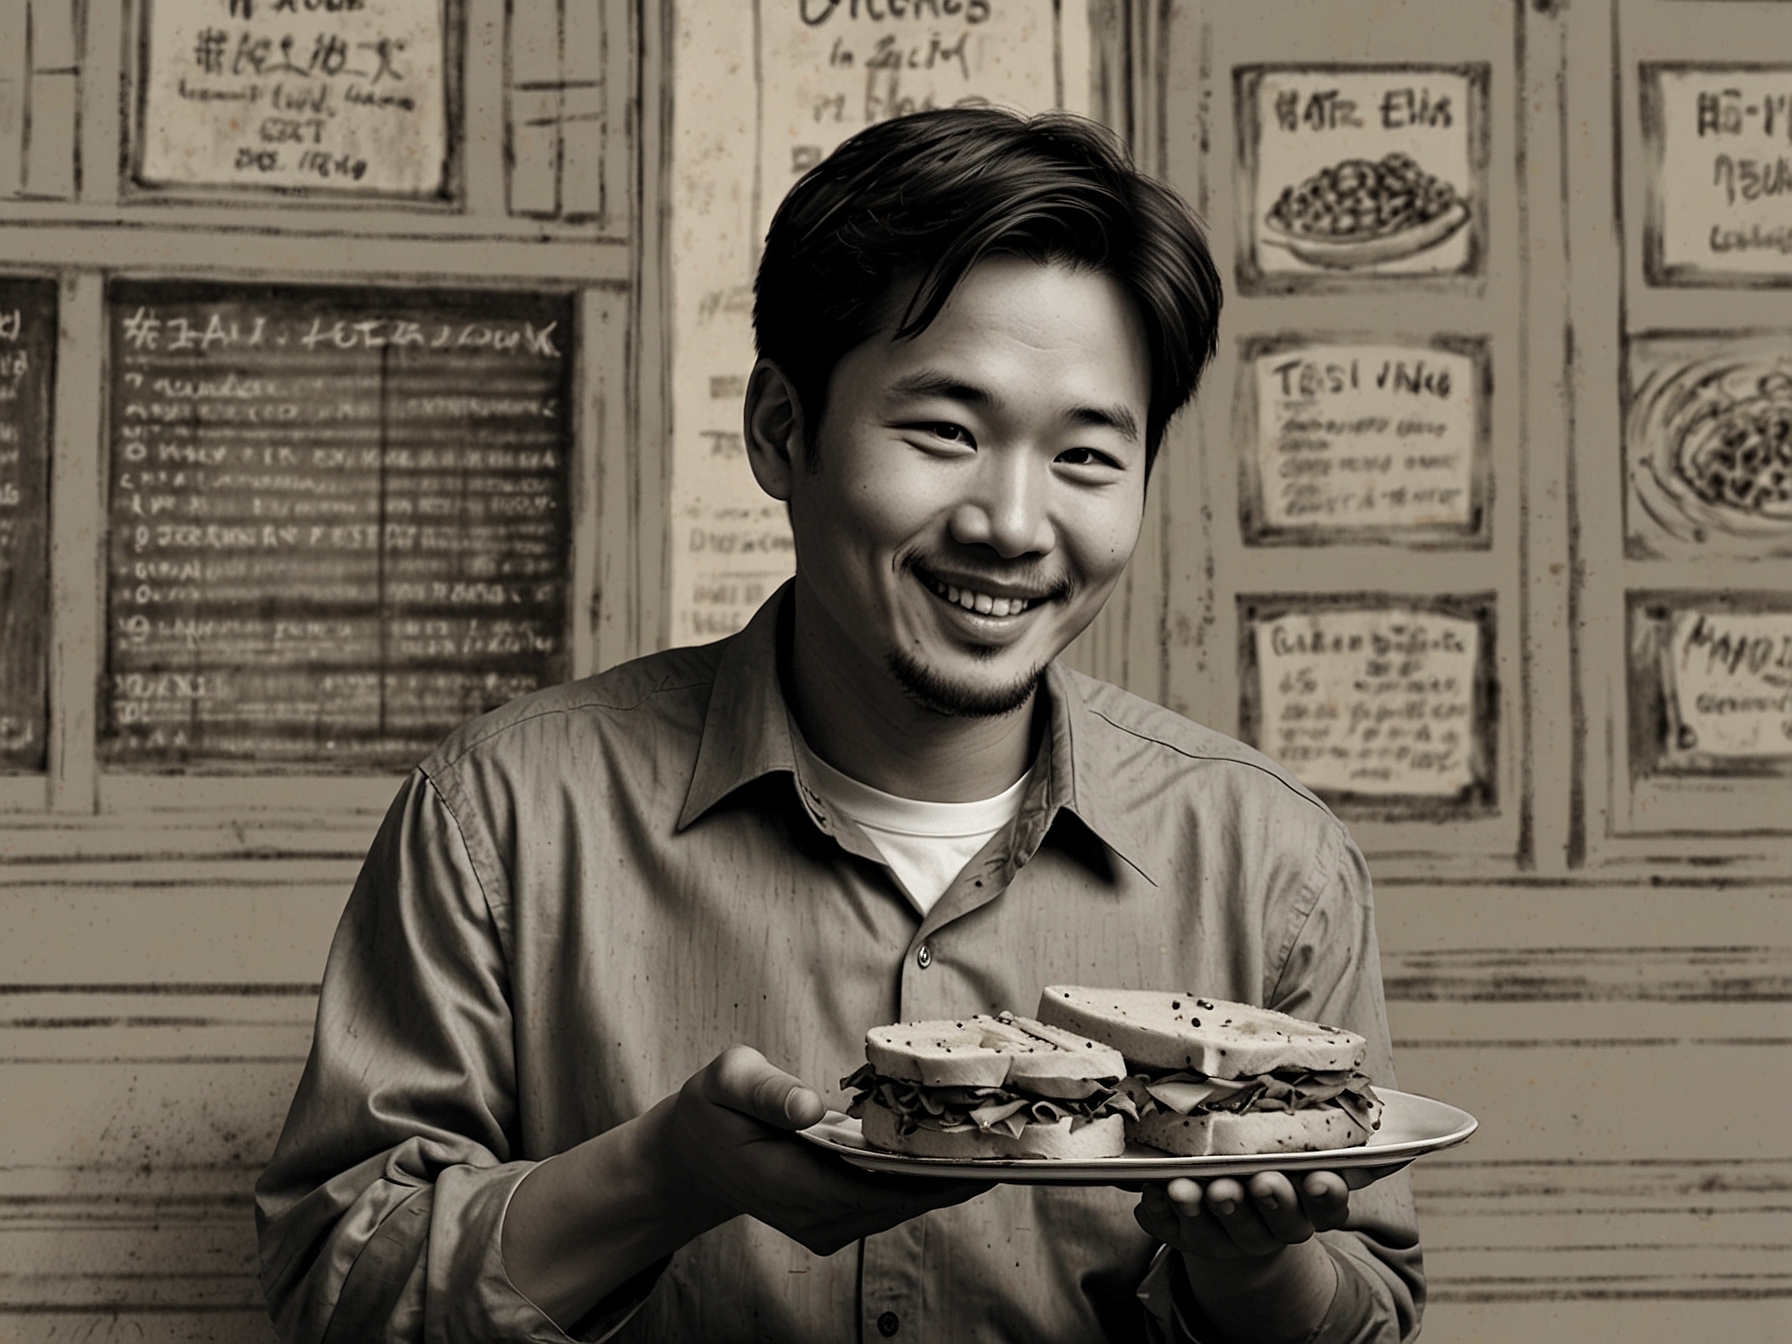 Owen Han showcasing one of his signature sandwiches, blending Italian and Chinese culinary traditions.